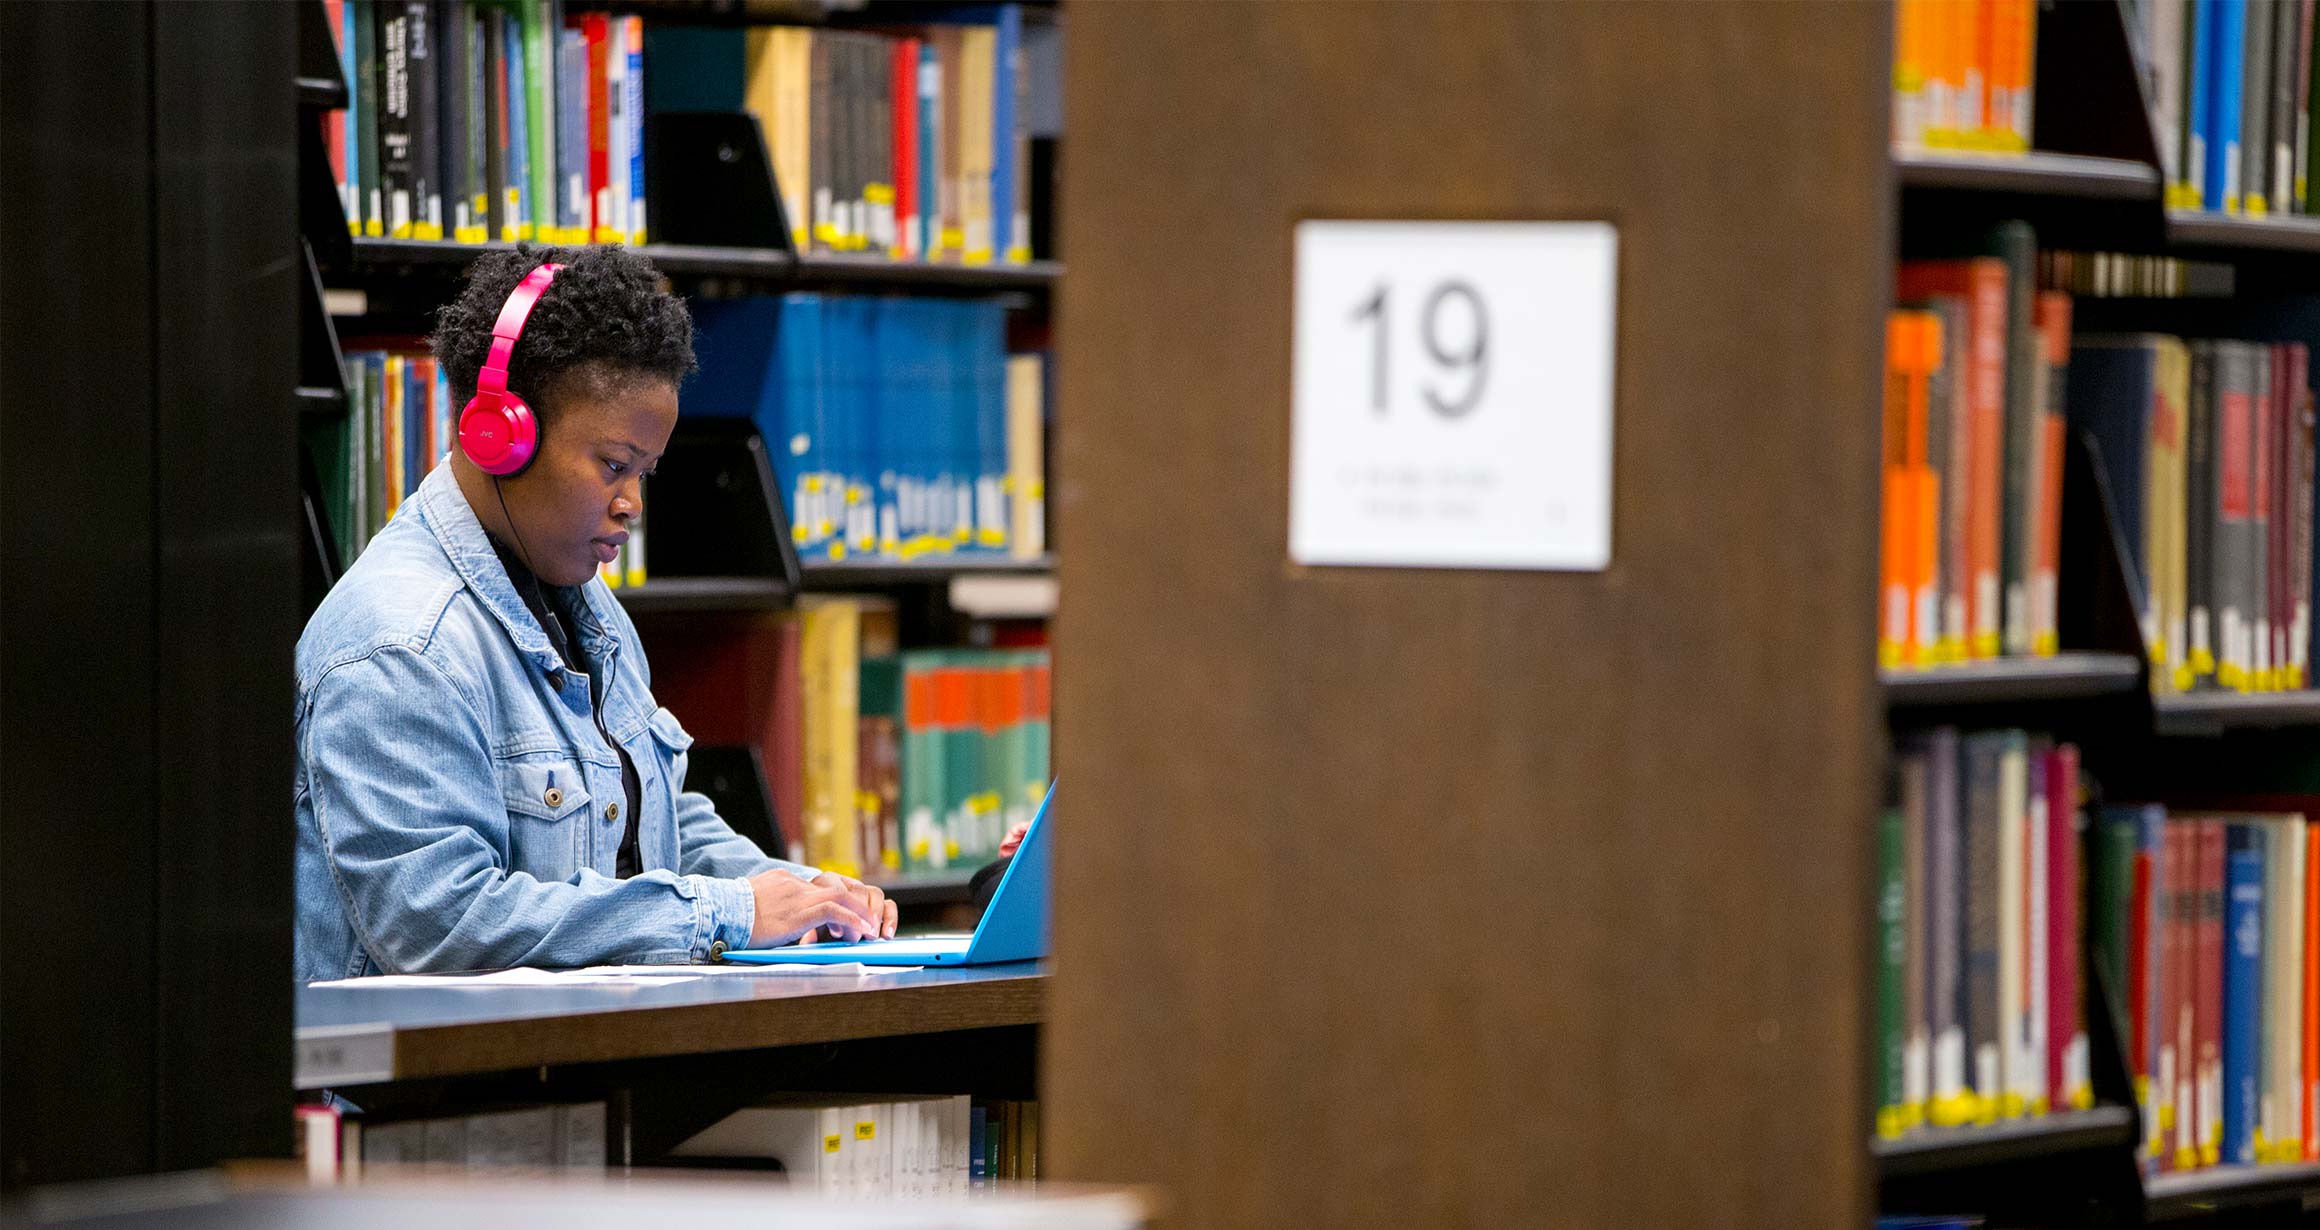 A student sits at a desk studying with headphones on